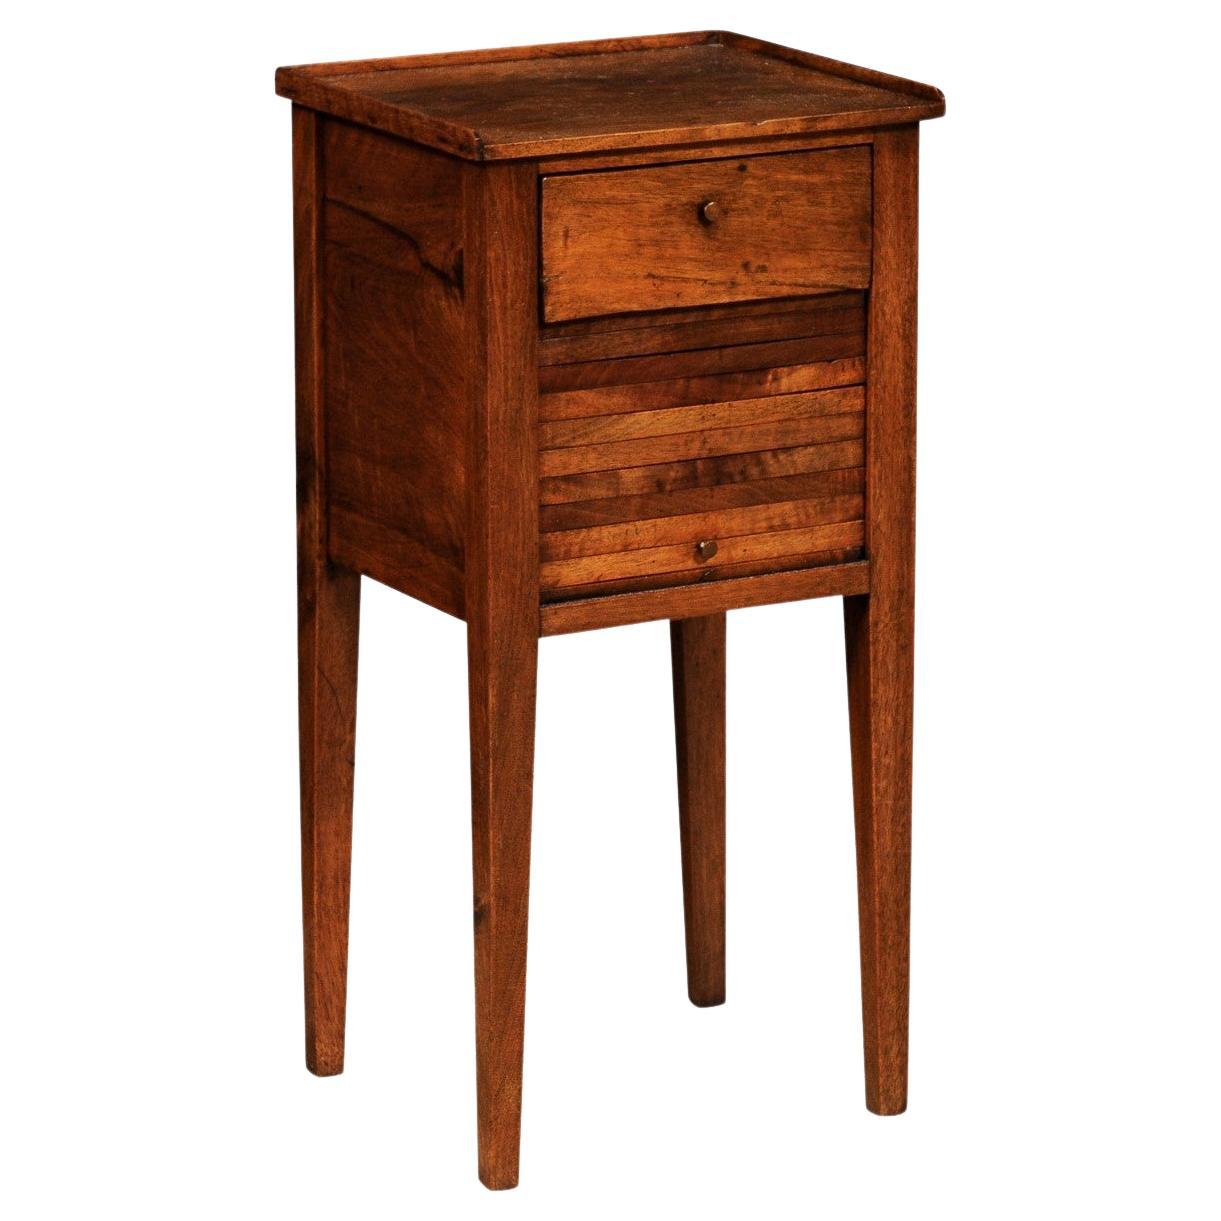 18th Century Italian Walnut Bedside Table with Single Drawer and Tambour Door